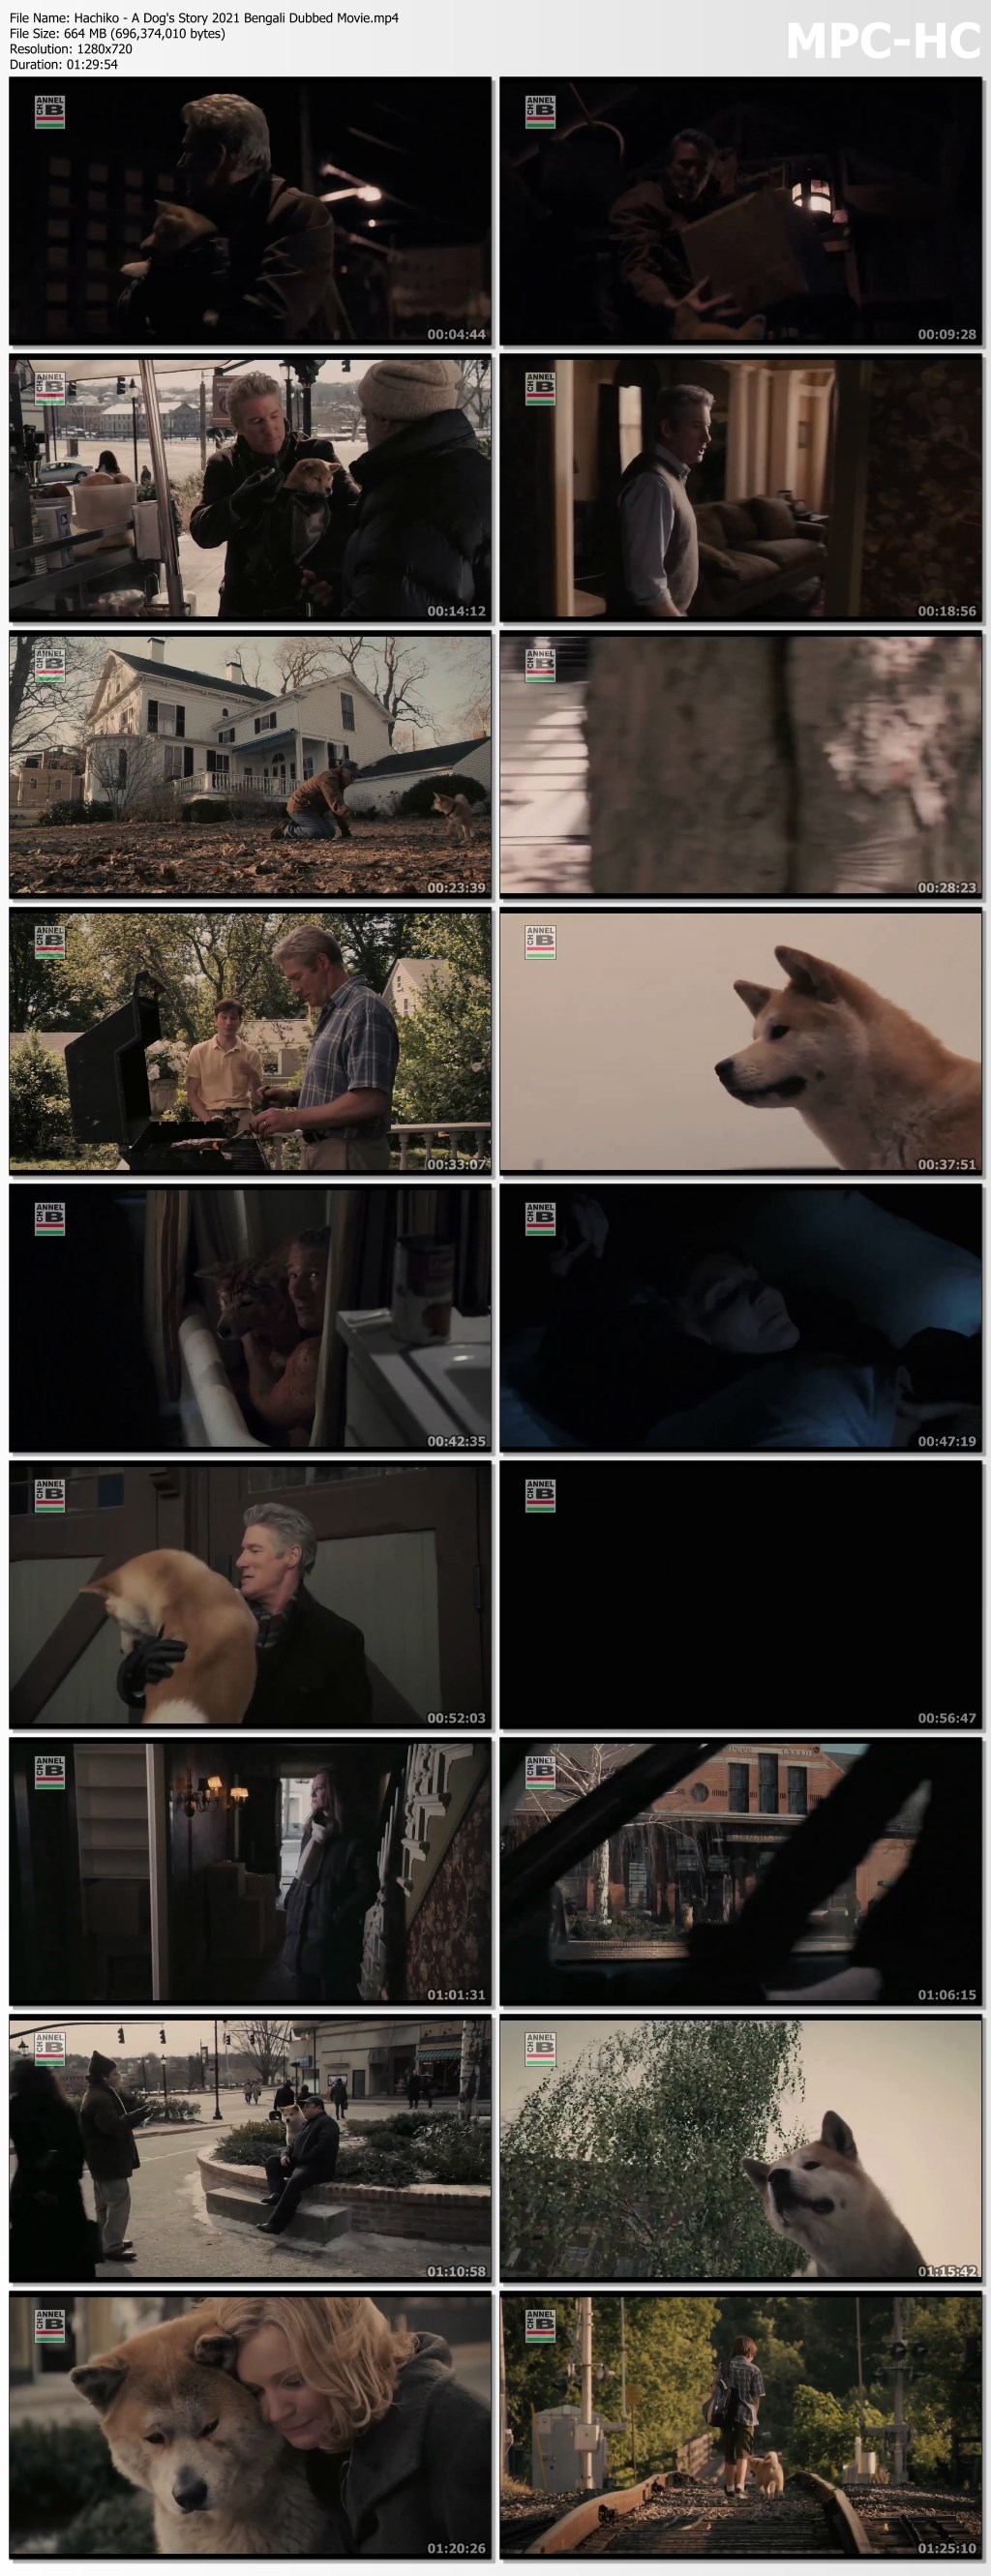 Hachiko---A-Dogs-Story-2021-Bengali-Dubbed-Movie.mp4_thumbs.jpg